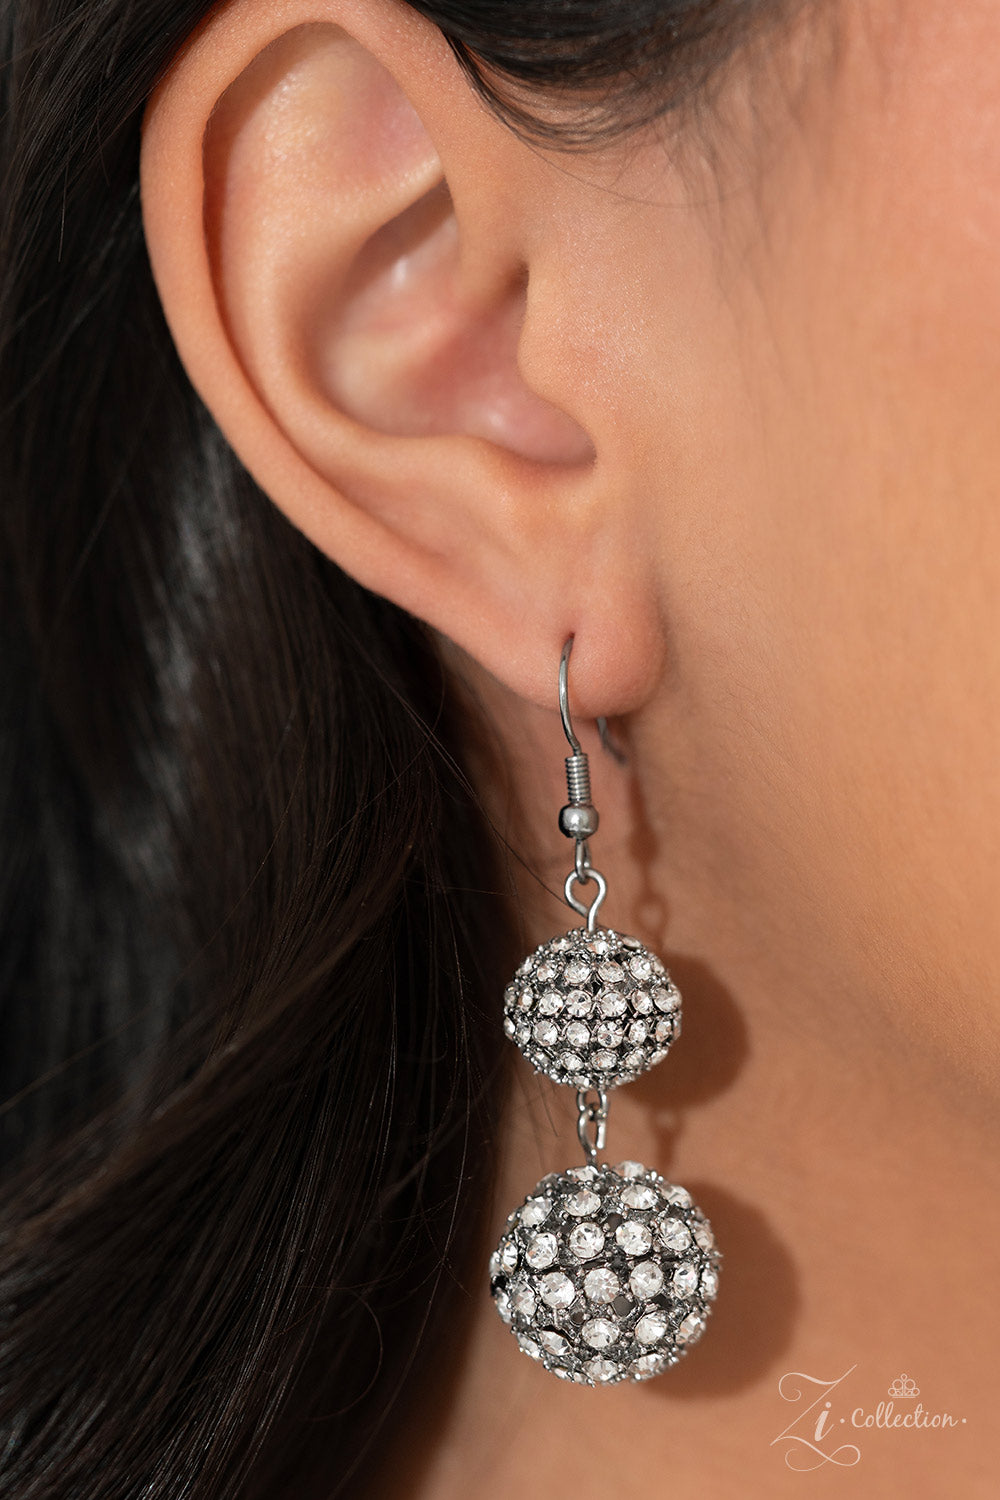 Glittery, white rhinestones cluster together, creating dramatically oversized, airy, spheres that sparkle vivaciously. Smaller rhinestone-encrusted spheres dance between the exaggerated accents, resulting in a dynamic display of texture and sheen. Features an adjustable clasp closure.